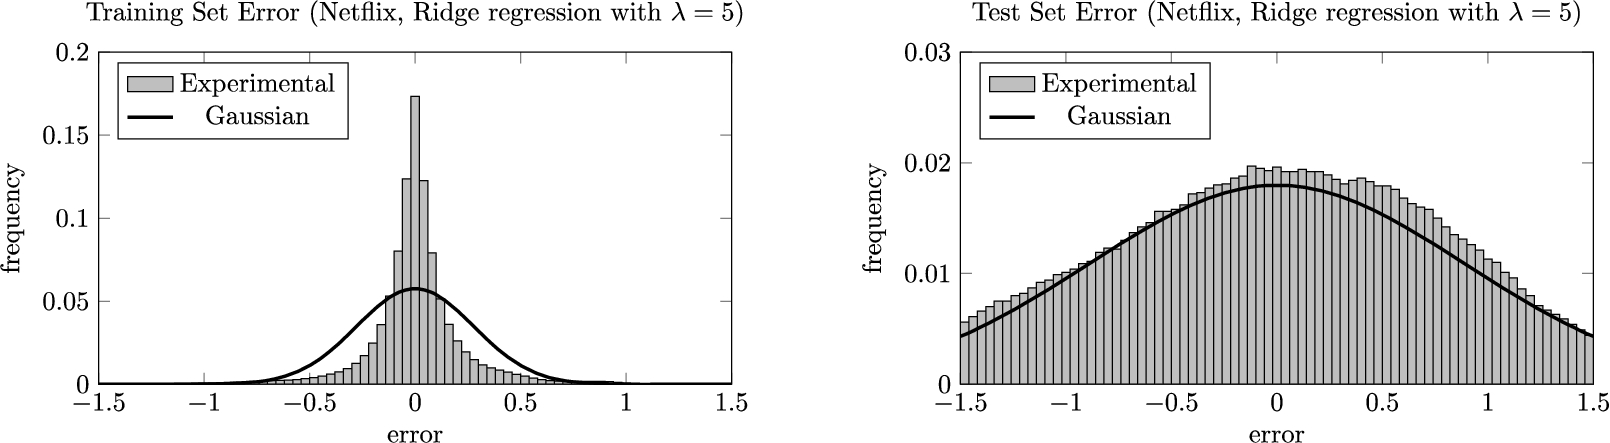 The training and test error distributions for an overfitted Ridge regression model. The histograms are juxtaposed with what we would expect if the errors were normally distributed with standard deviation Remp=0.2774 and Rcv=0.8884, respectively. Note the different vertical scale for the two graphs. To minimize the effect of noise, the errors were measured using 1000 different random 75–25 splits of the data into training and test sets and then aggregated.